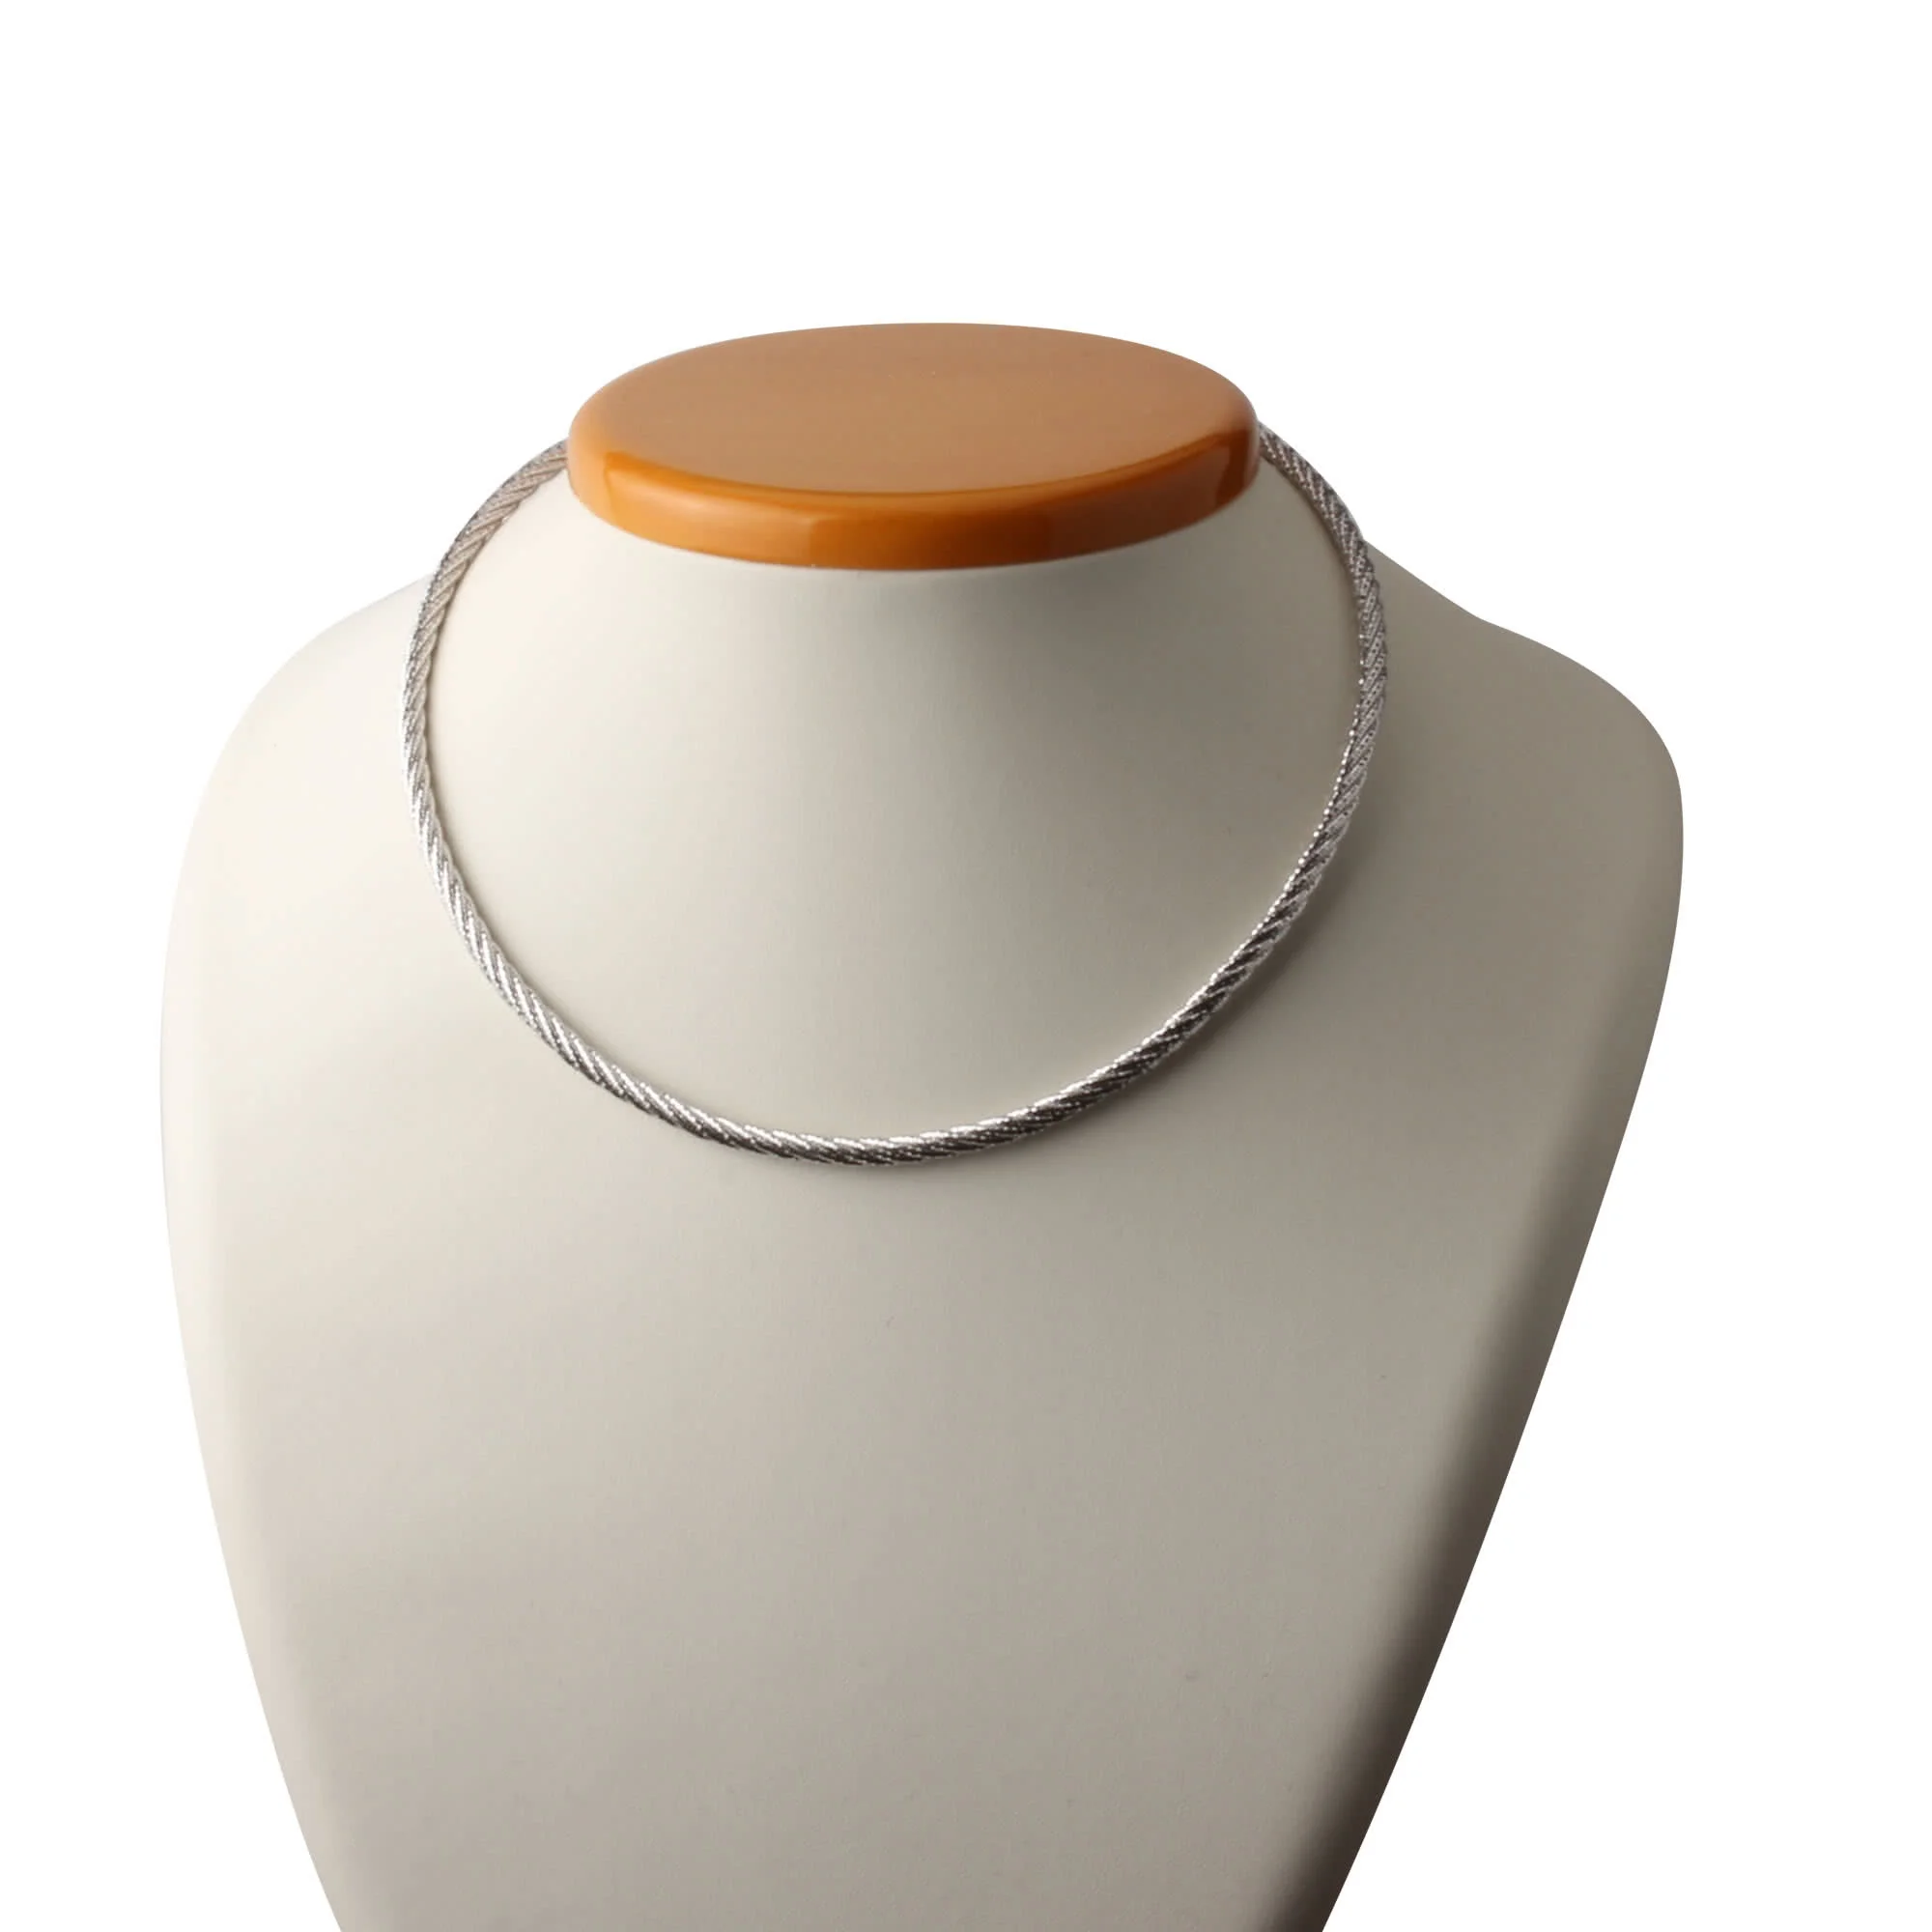 Fashion Jewelry Collection - Sterling Silver Two-Tone 14k Yellow Gold  Plated 6mm Reversible Omega Necklace CNY-Q-5587 - D&D Jewelry in Walnut  Creek CA